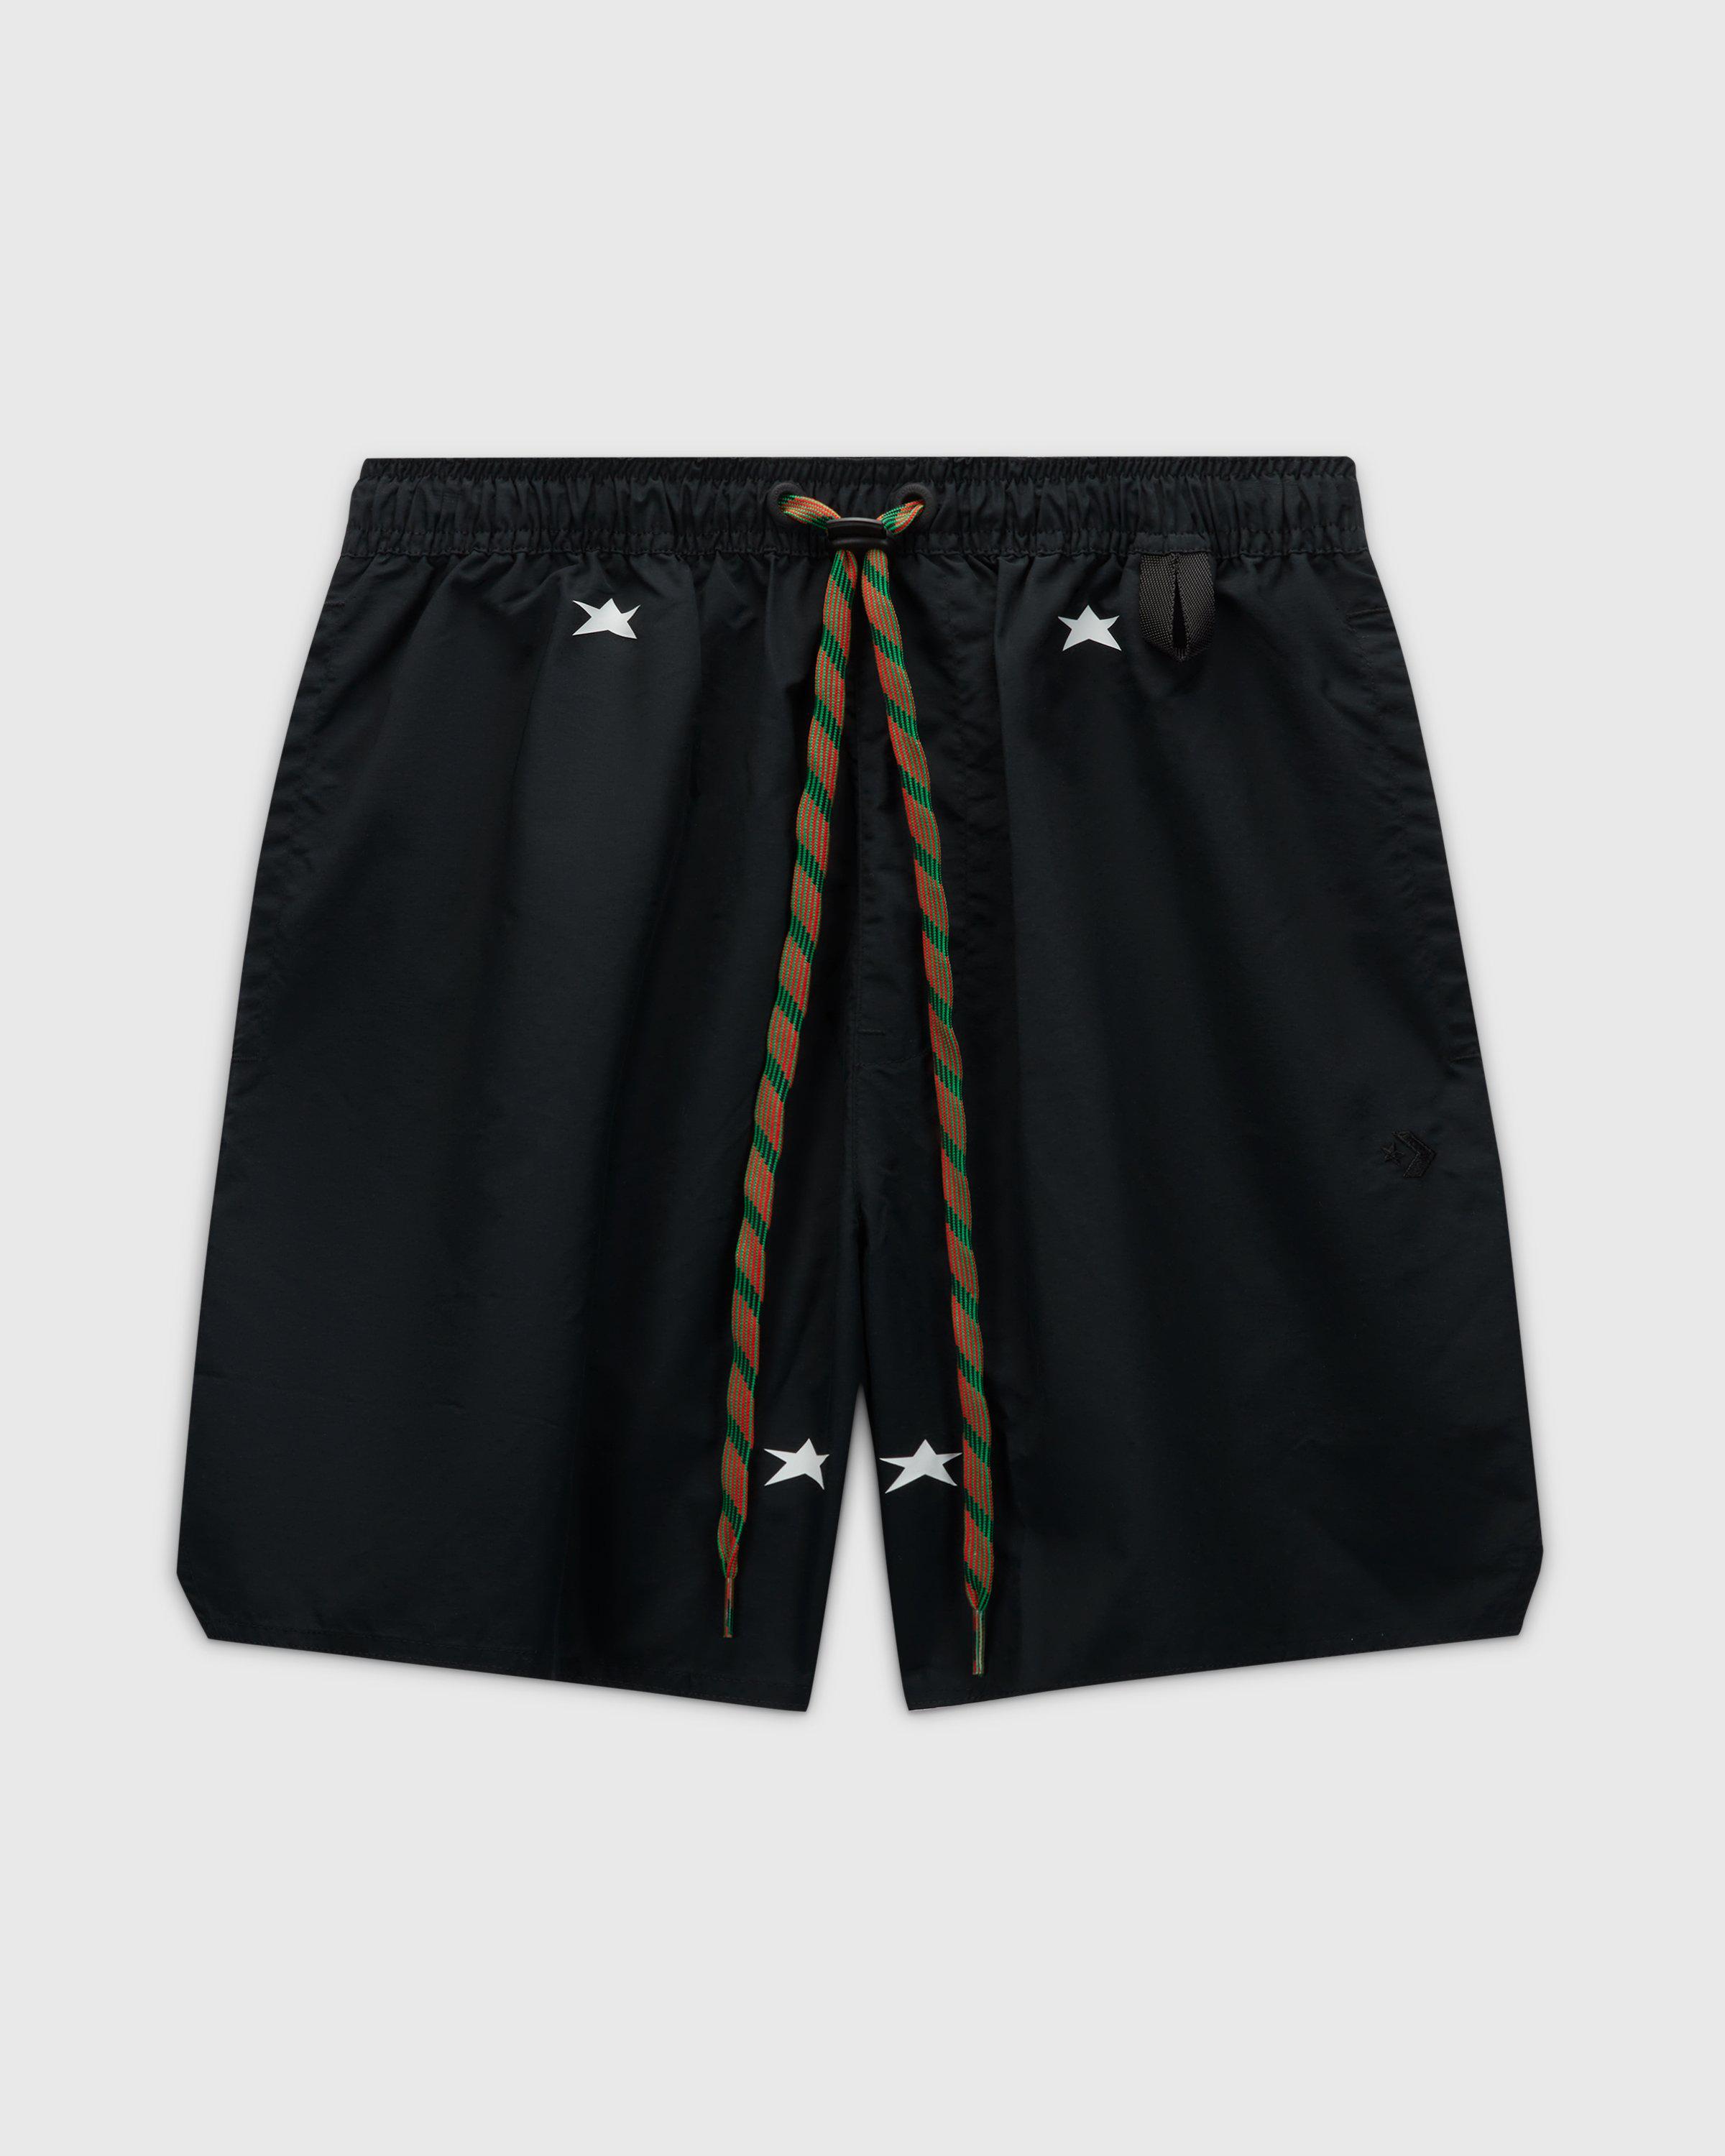 Converse x Barriers – Court Ready Cutter Shorts Black by CONVERSE X BARRIERS